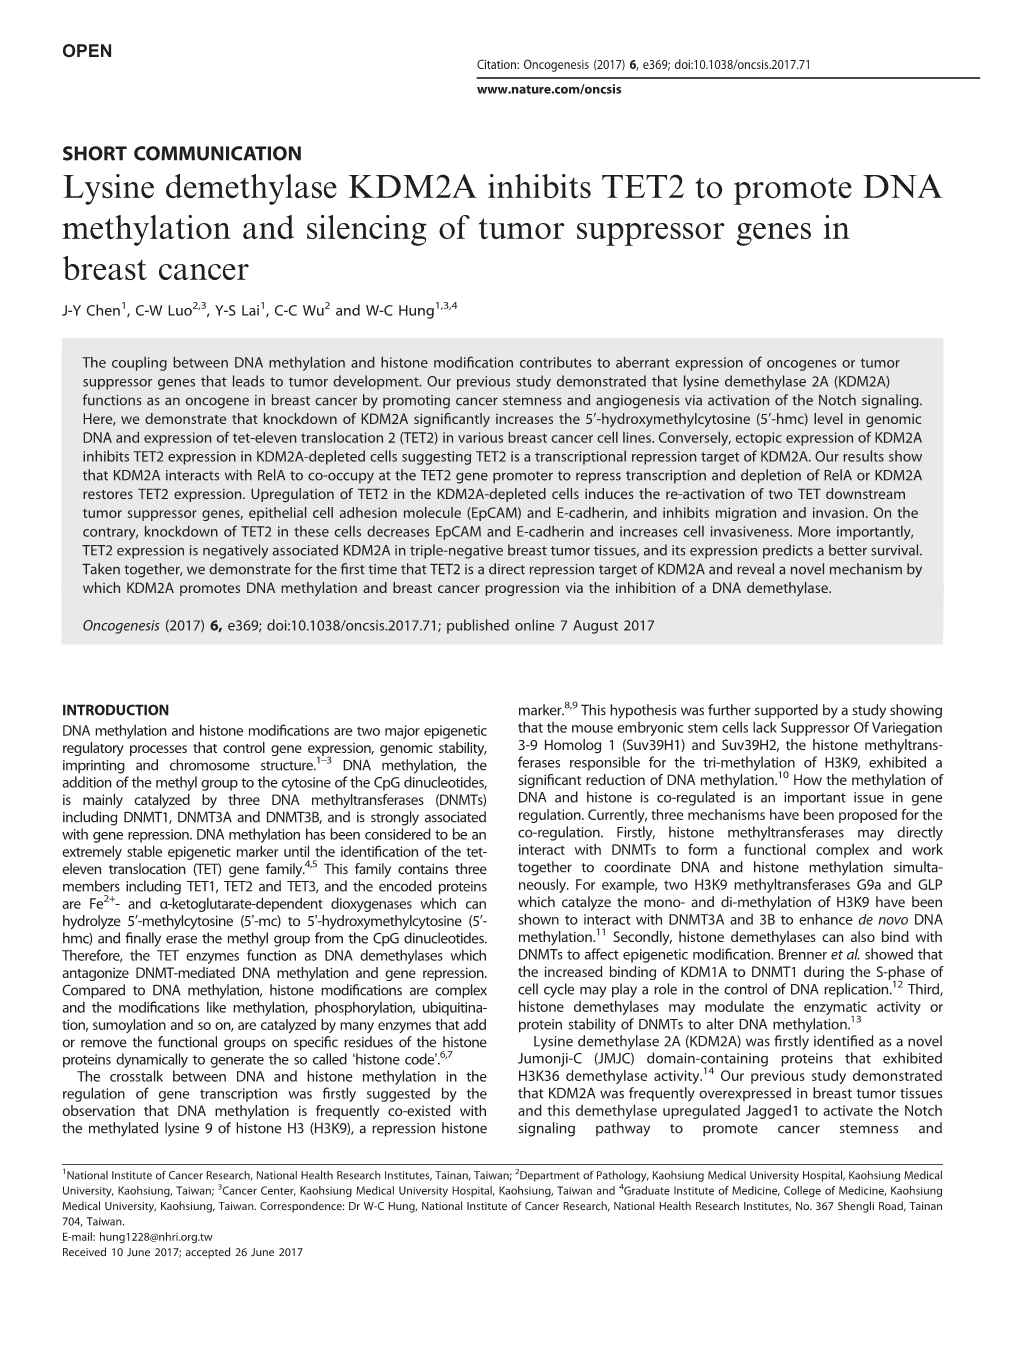 Lysine Demethylase KDM2A Inhibits TET2 to Promote DNA Methylation and Silencing of Tumor Suppressor Genes in Breast Cancer